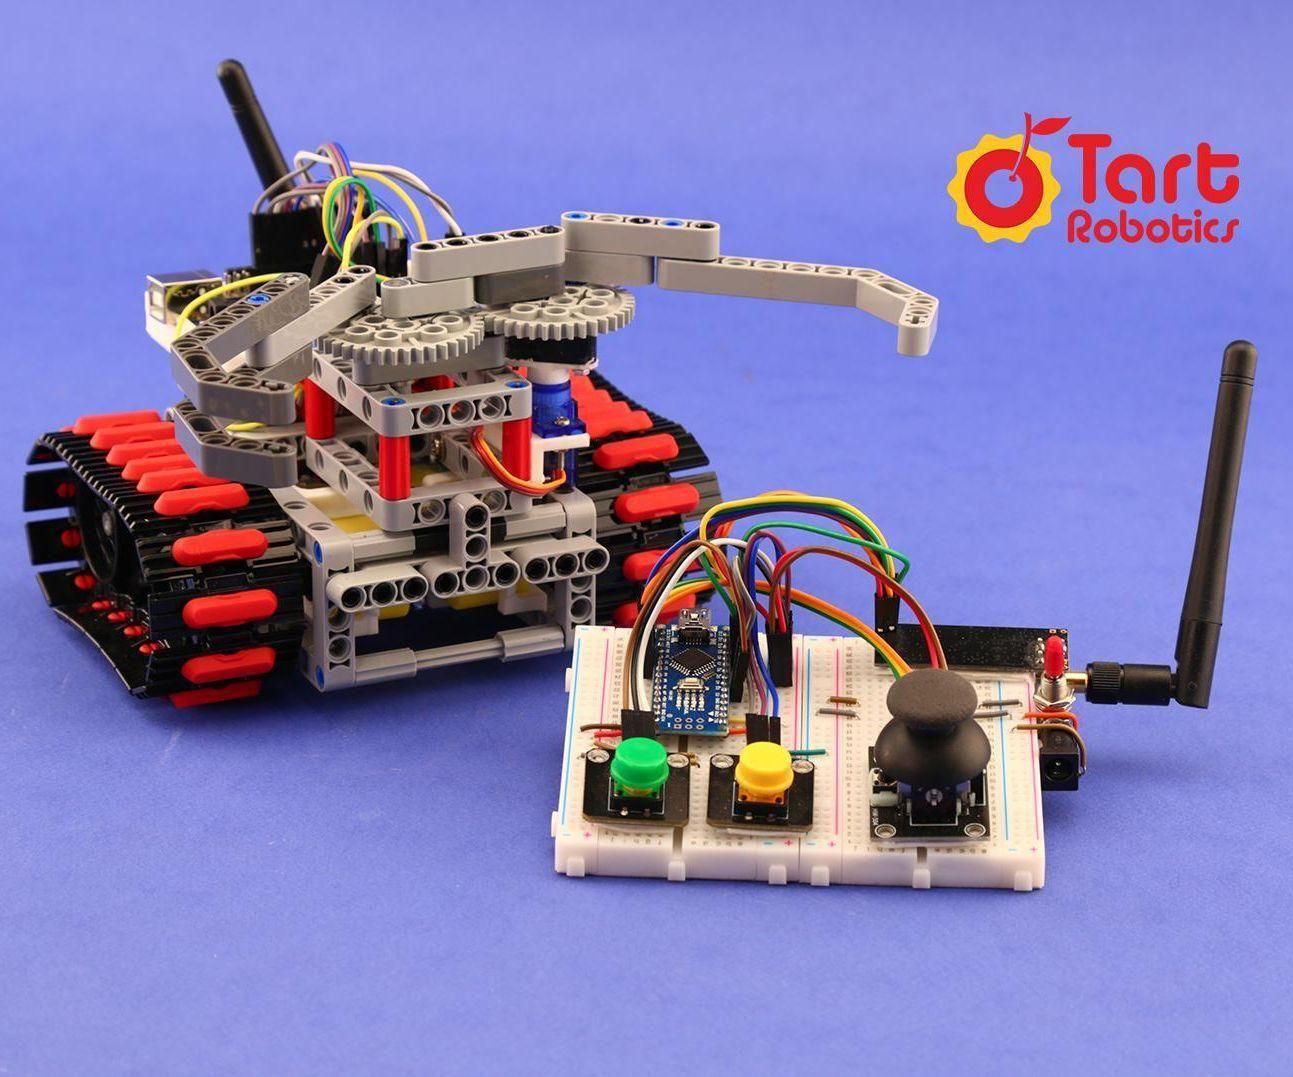 A DIY Rescue Robot With Arduino, 3D Printed, and Lego-compatible Parts